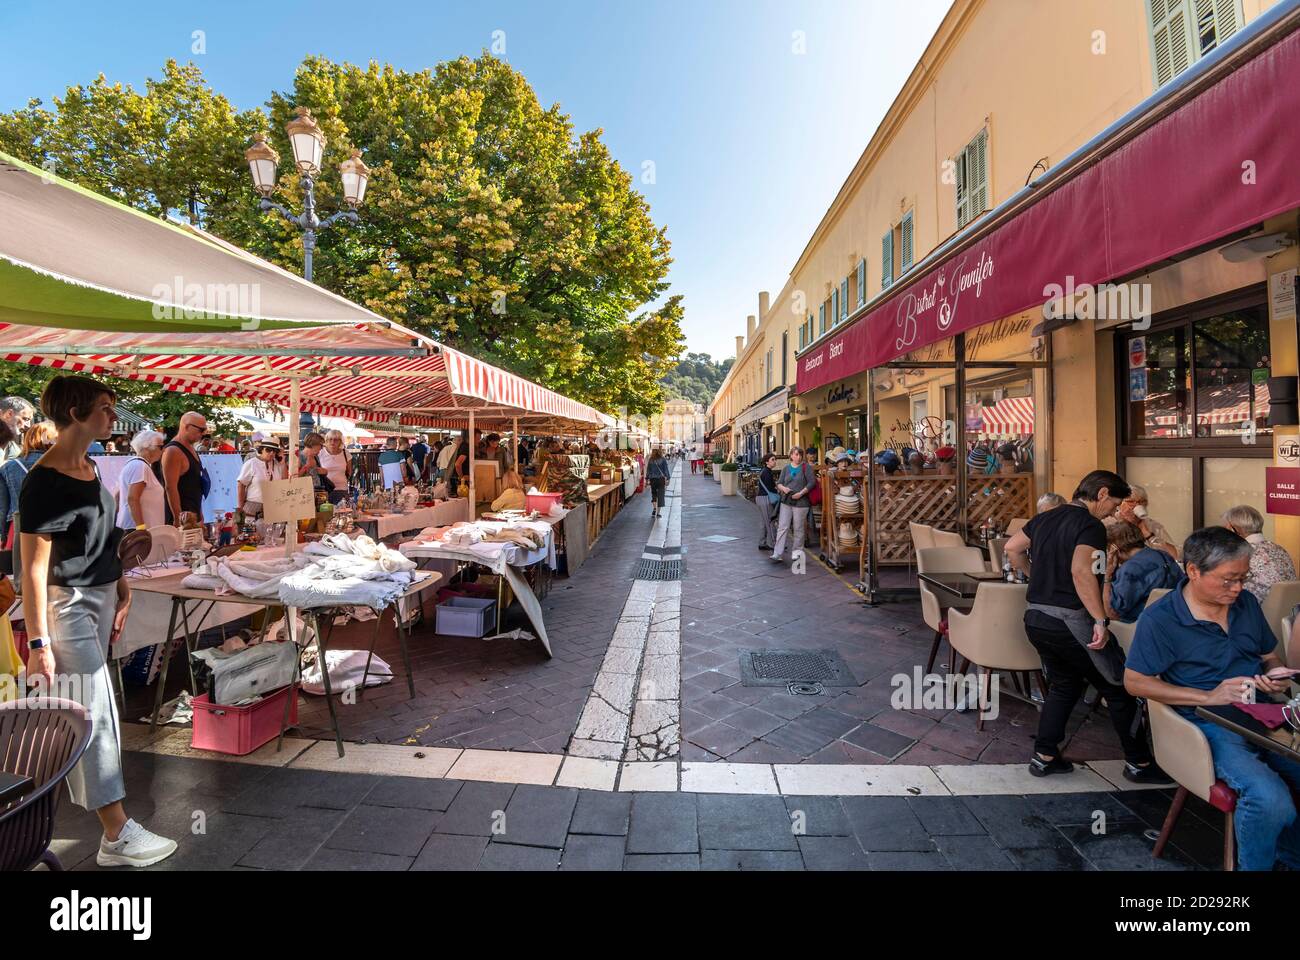 The outdoor covered market and sidewalk cafes at lunch time at the Cours Saleya, in Old Town Nice, France, on the French Riviera. Stock Photo